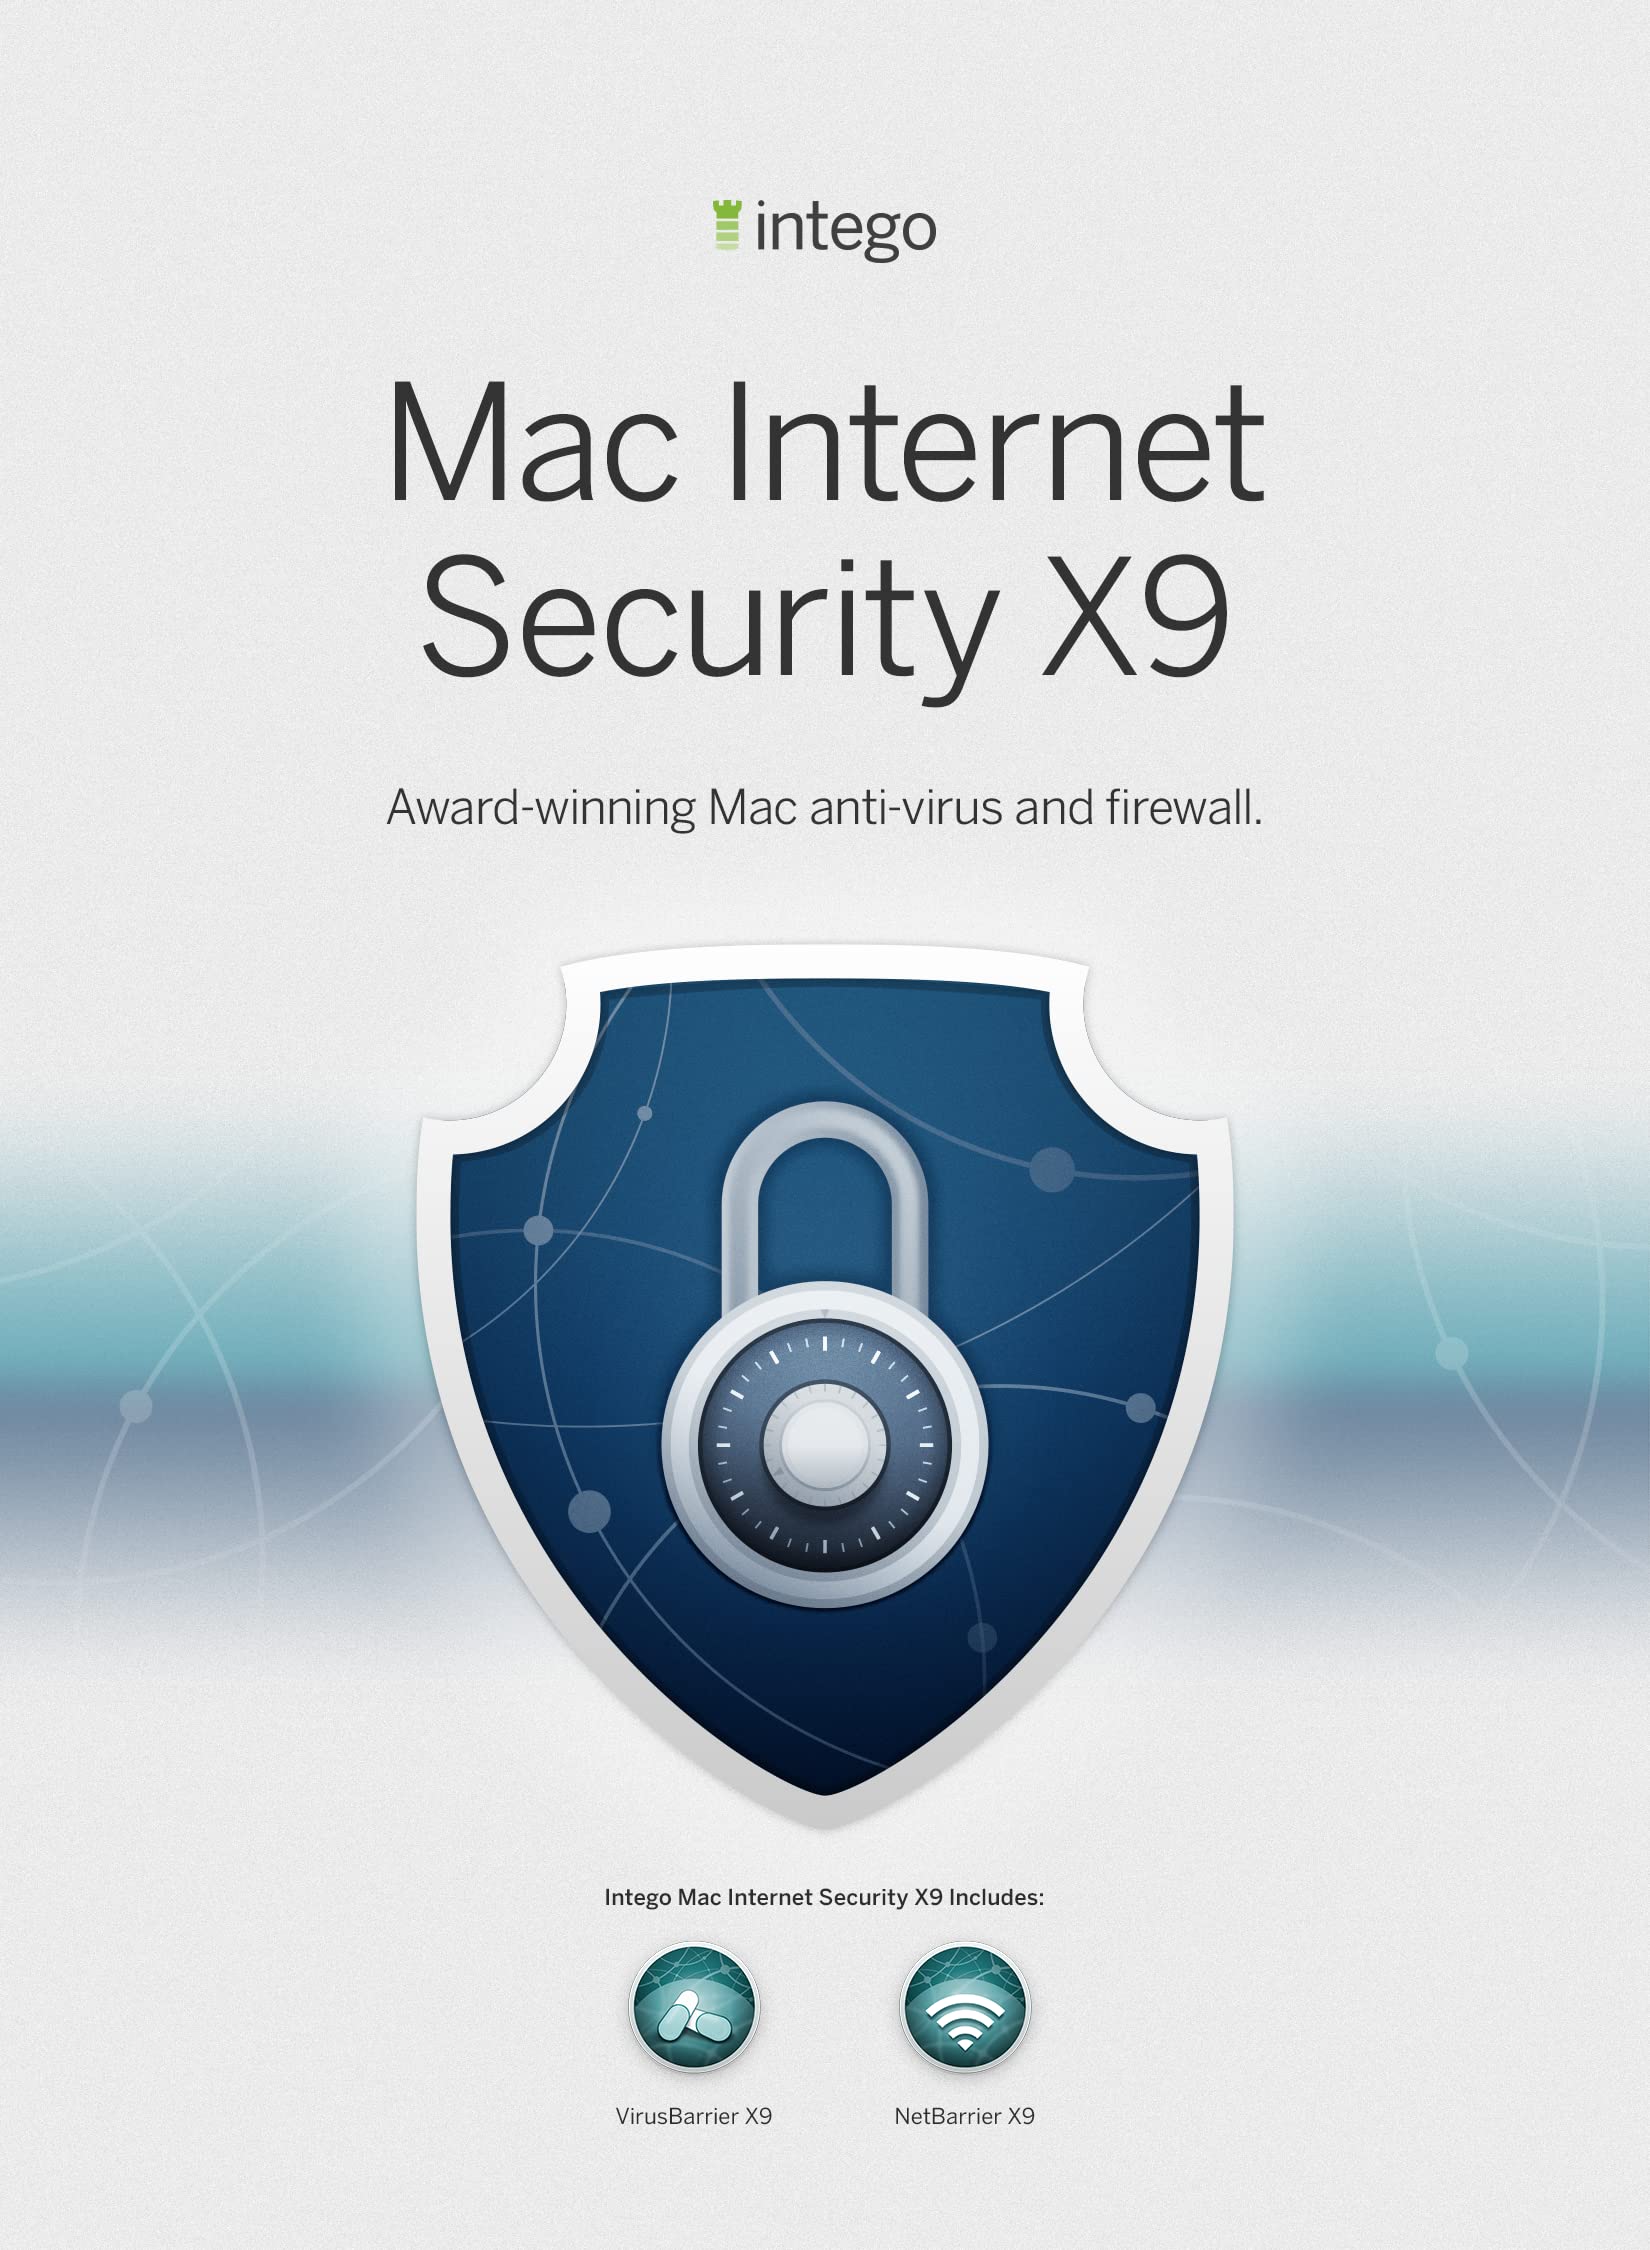 what is the best internet security for mac